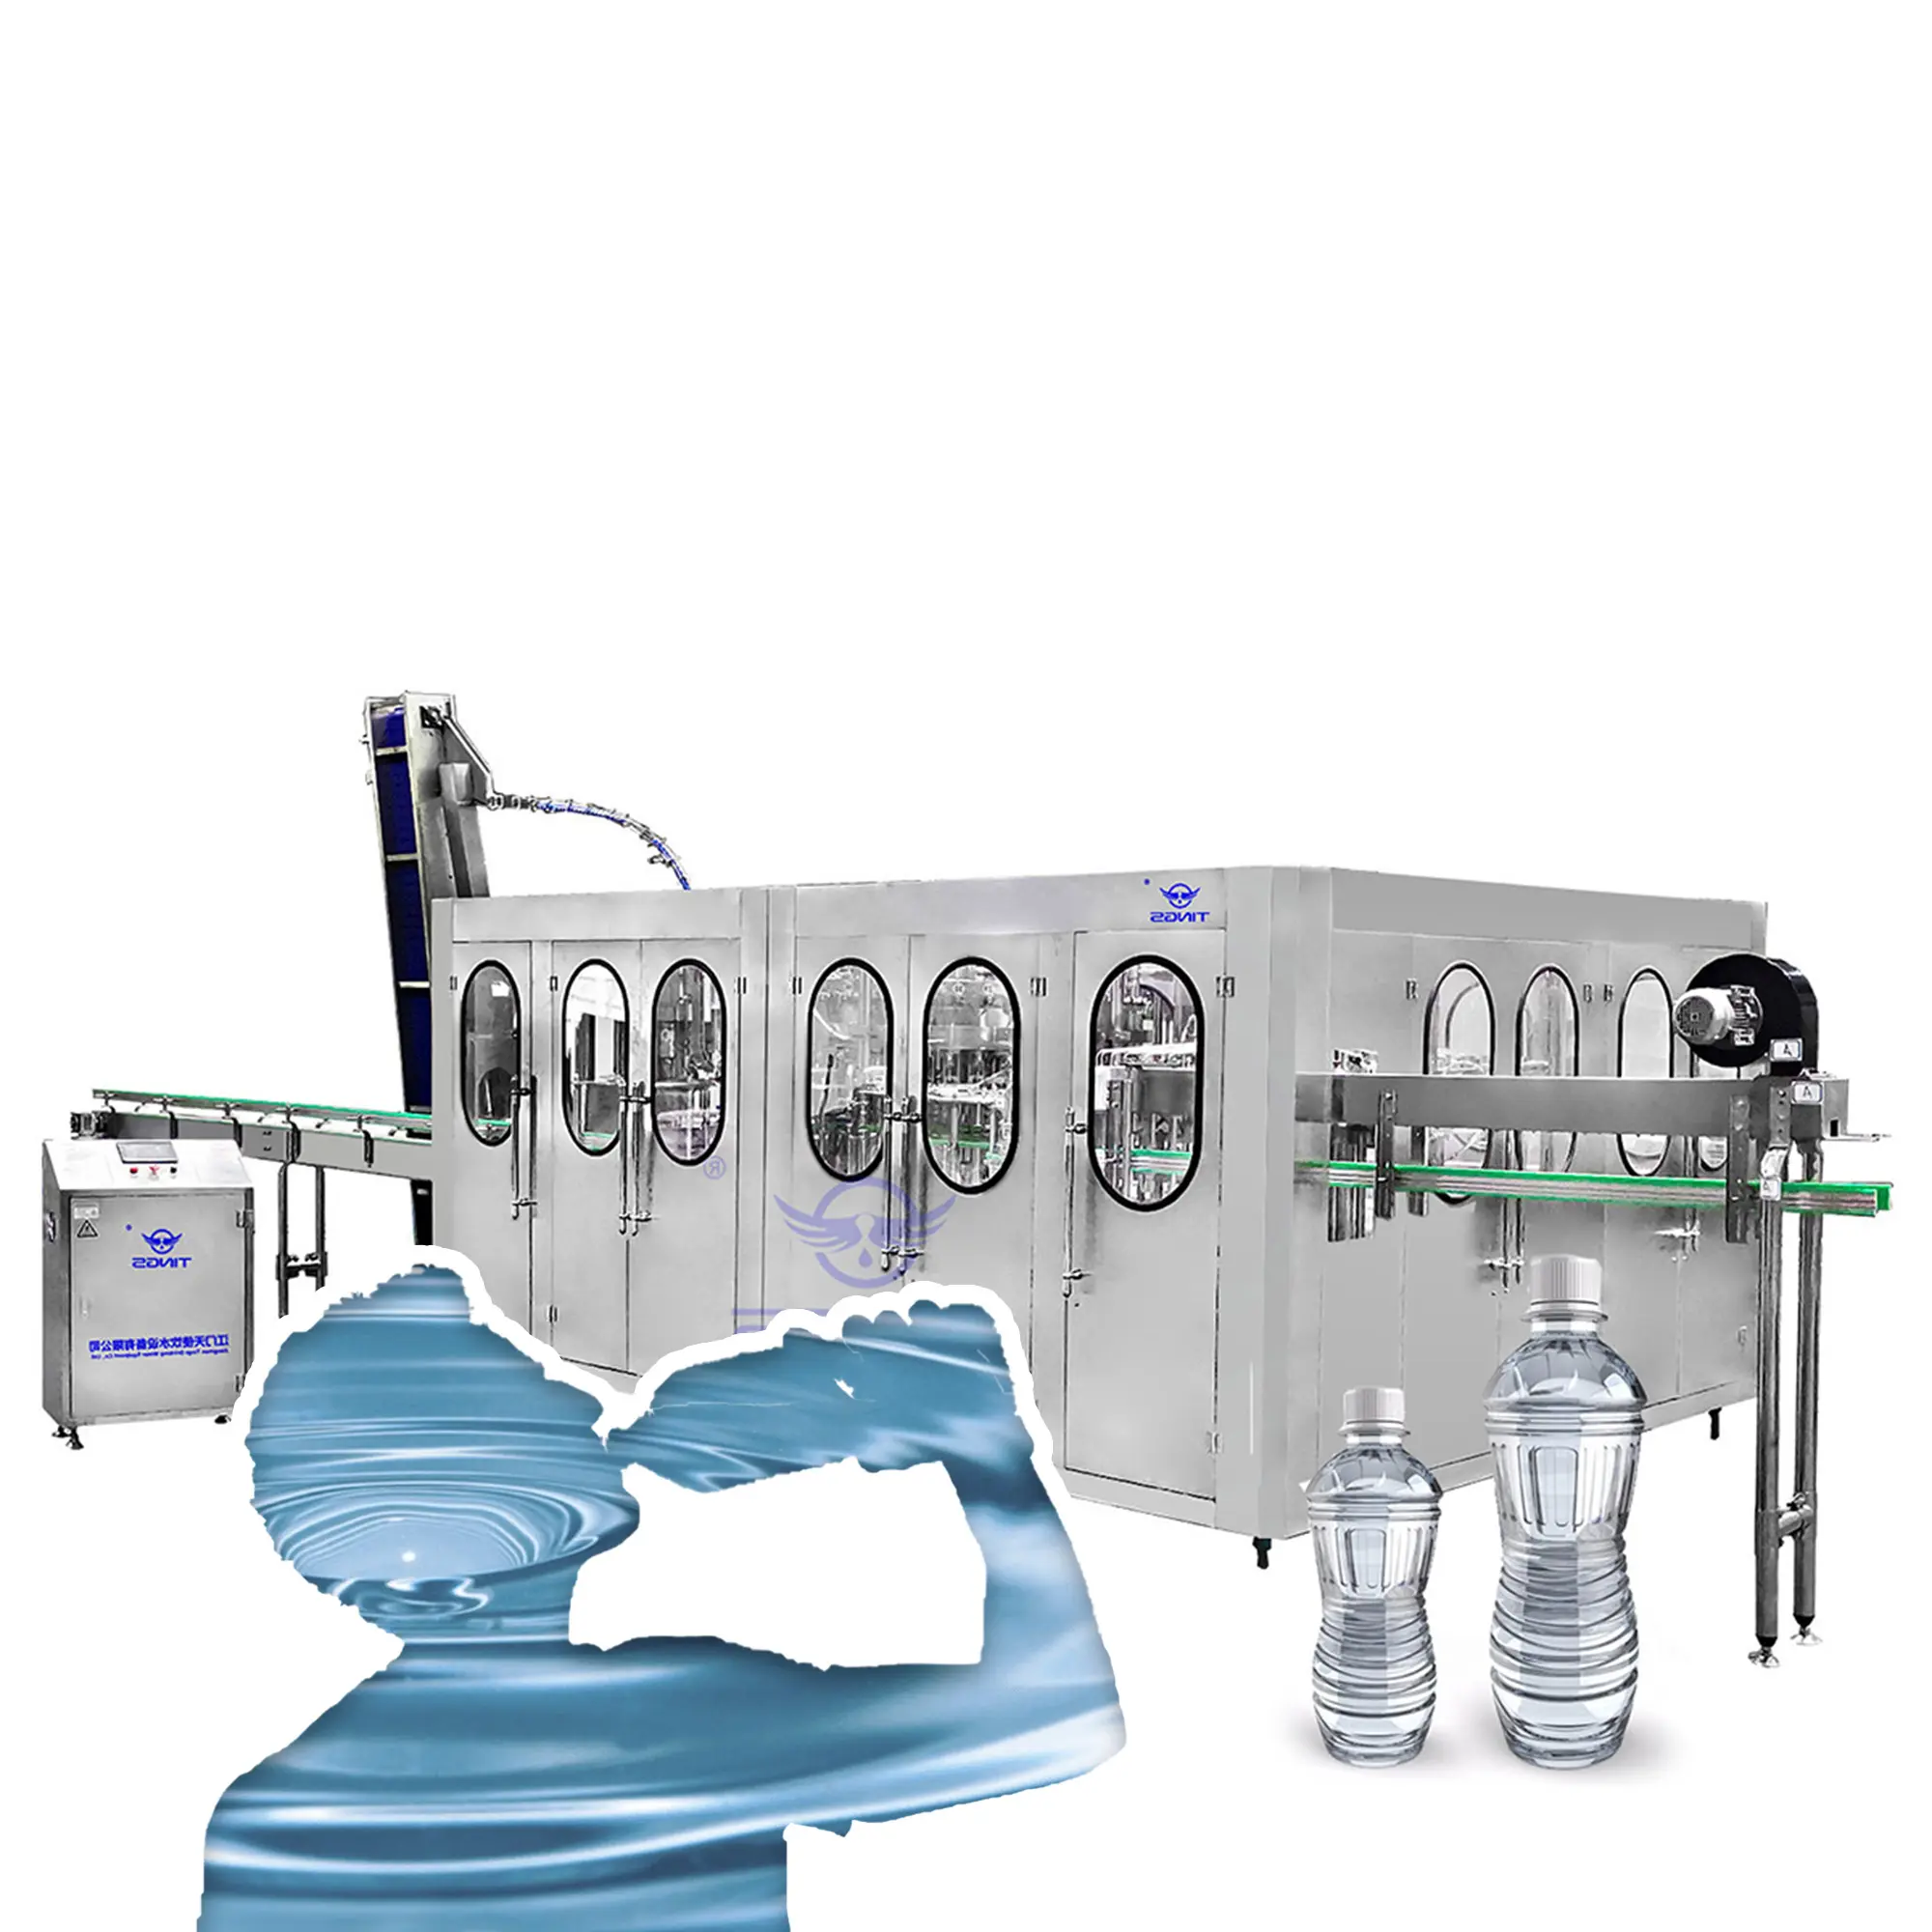 Customize Full Automatic Filling Equipment Water Packing Filling Sealing Machine Made In China